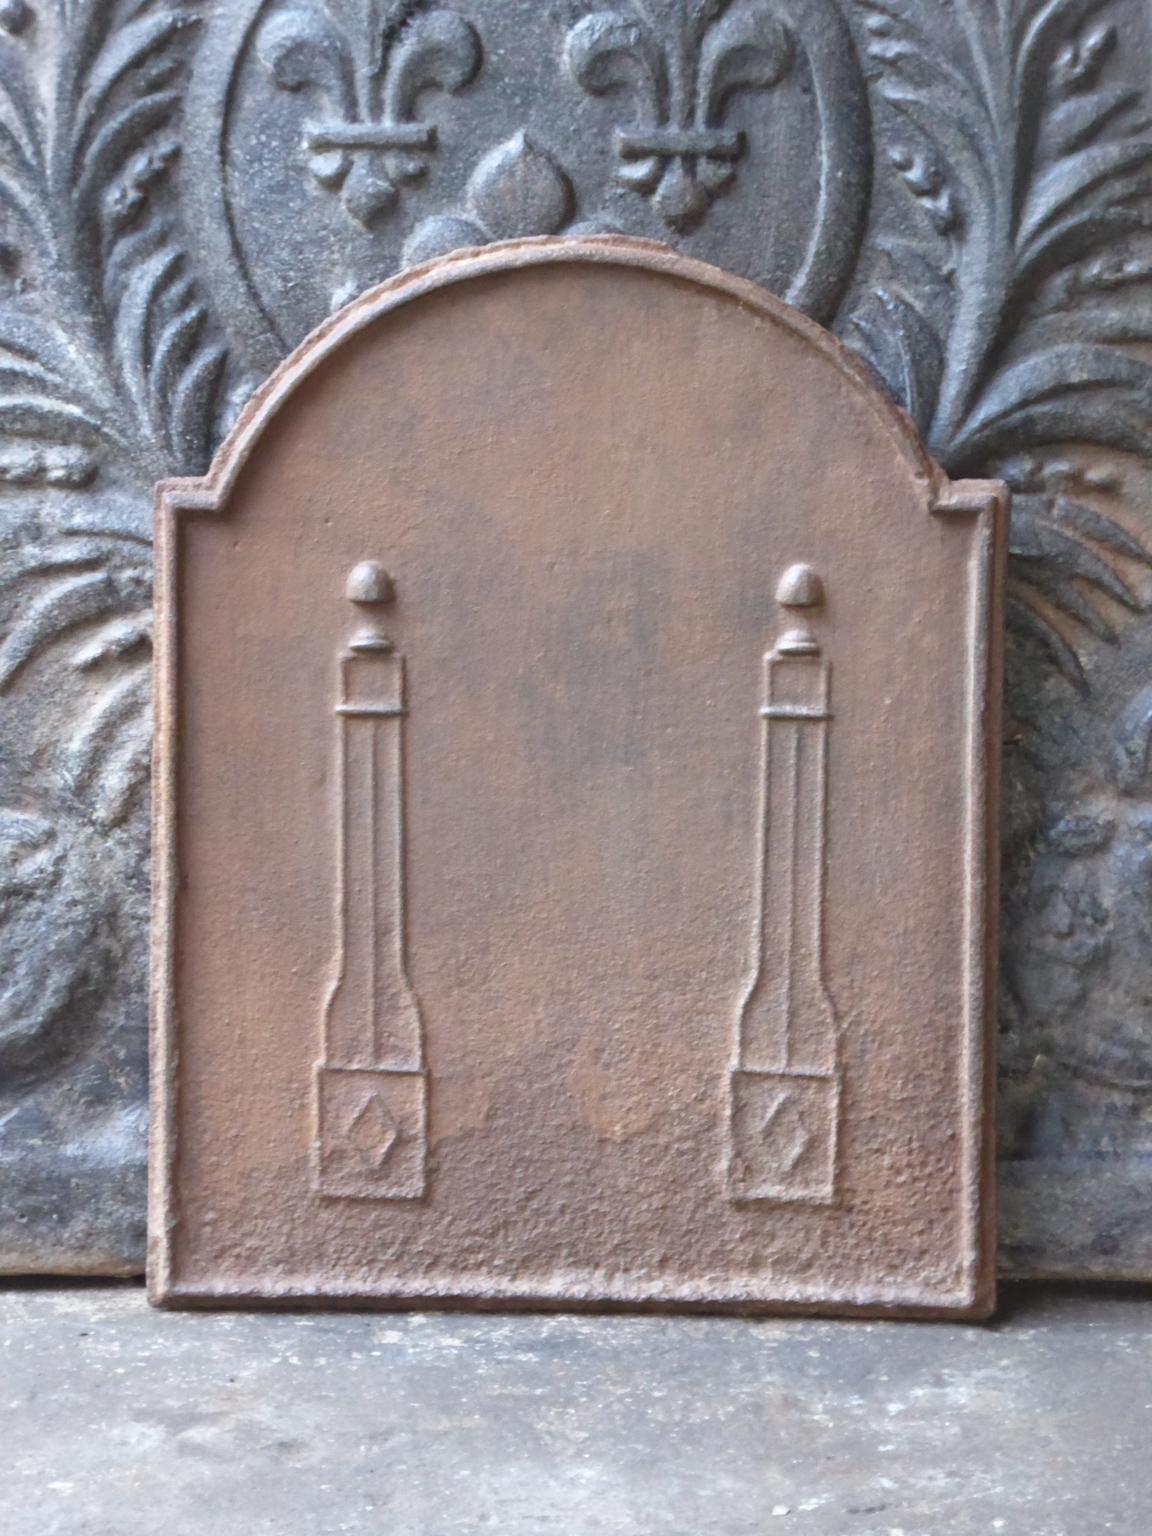 Small 19th century French neoclassical fireback with two pillars of freedom. The pillars symbolize the value liberty, one of the three values of the French revolution. 

The fireback is made of cast iron and has a natural brown patina. Upon